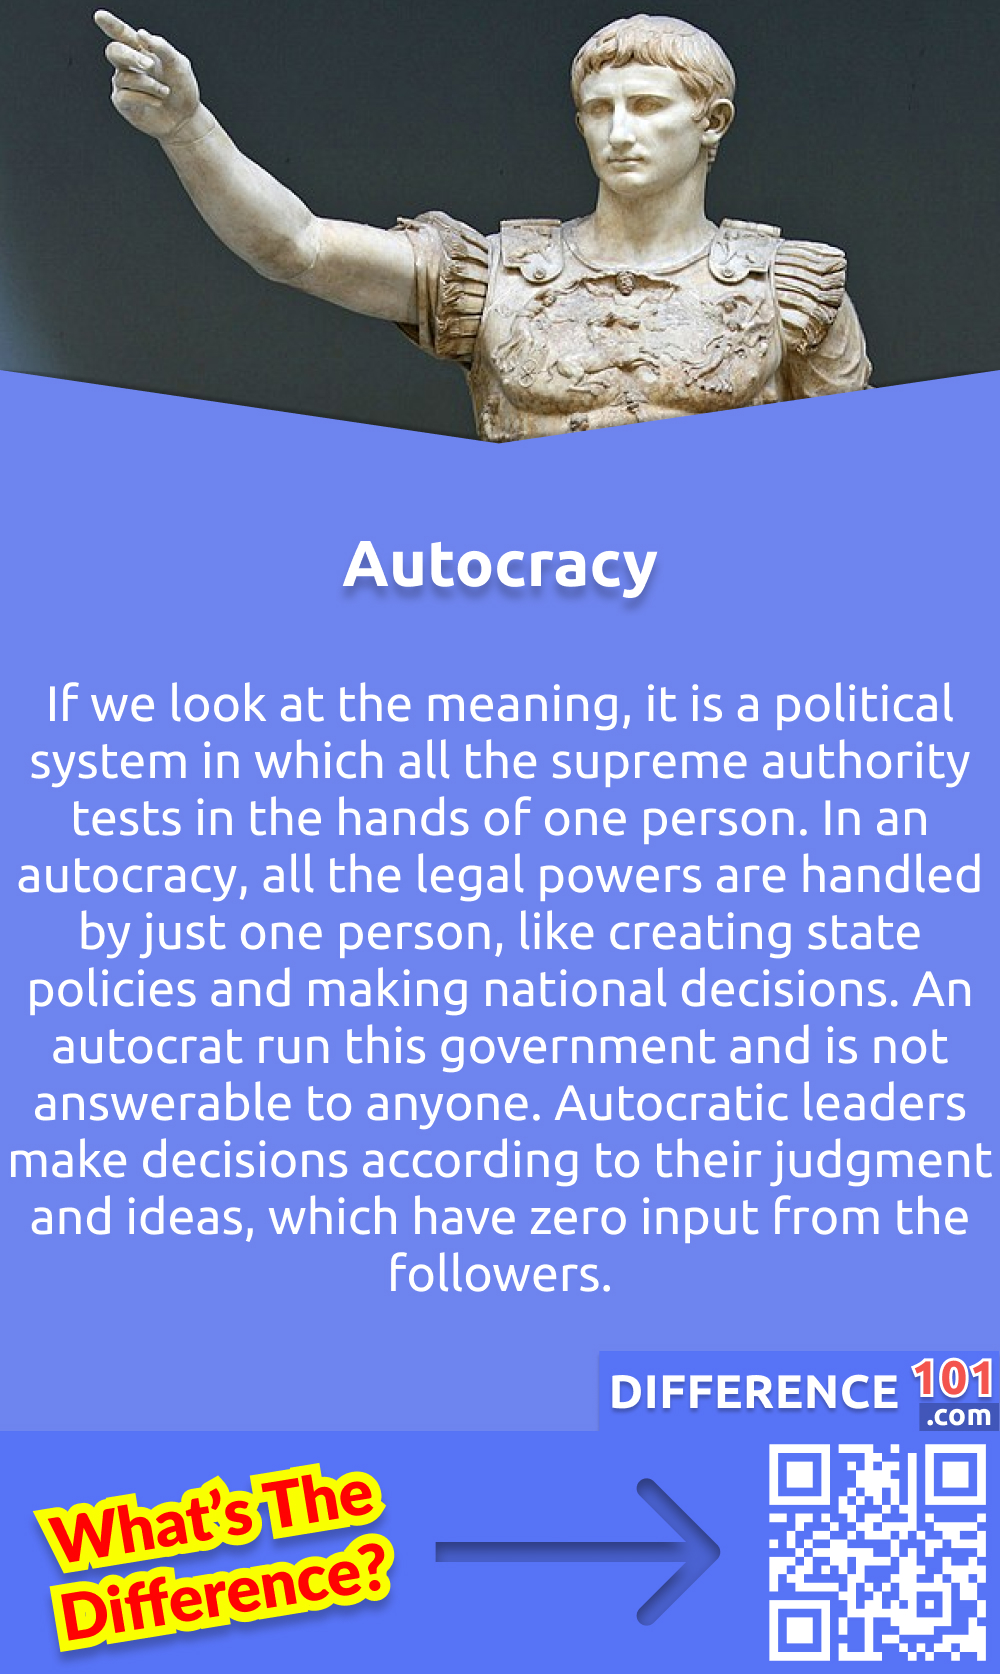 What Is Autocracy? If we look at the meaning, it is a political system in which all the supreme authority tests in the hands of one person. In an autocracy, all the legal powers are handled by just one person, like creating state policies and making national decisions. An autocrat run this government and is not answerable to anyone. Autocratic leaders make decisions according to their judgment and ideas, which have zero input from the followers. But at earlier times, the word "autocracy" has a more positive meaning. At that time, autocratic regimes did not have to deal with political fights from the opposing sides because there were none to begin with. For example, August, the first Roman emperor, retained the Roman senate and kept all the power to himself. In his time, Rome grew prosperous and peaceful.